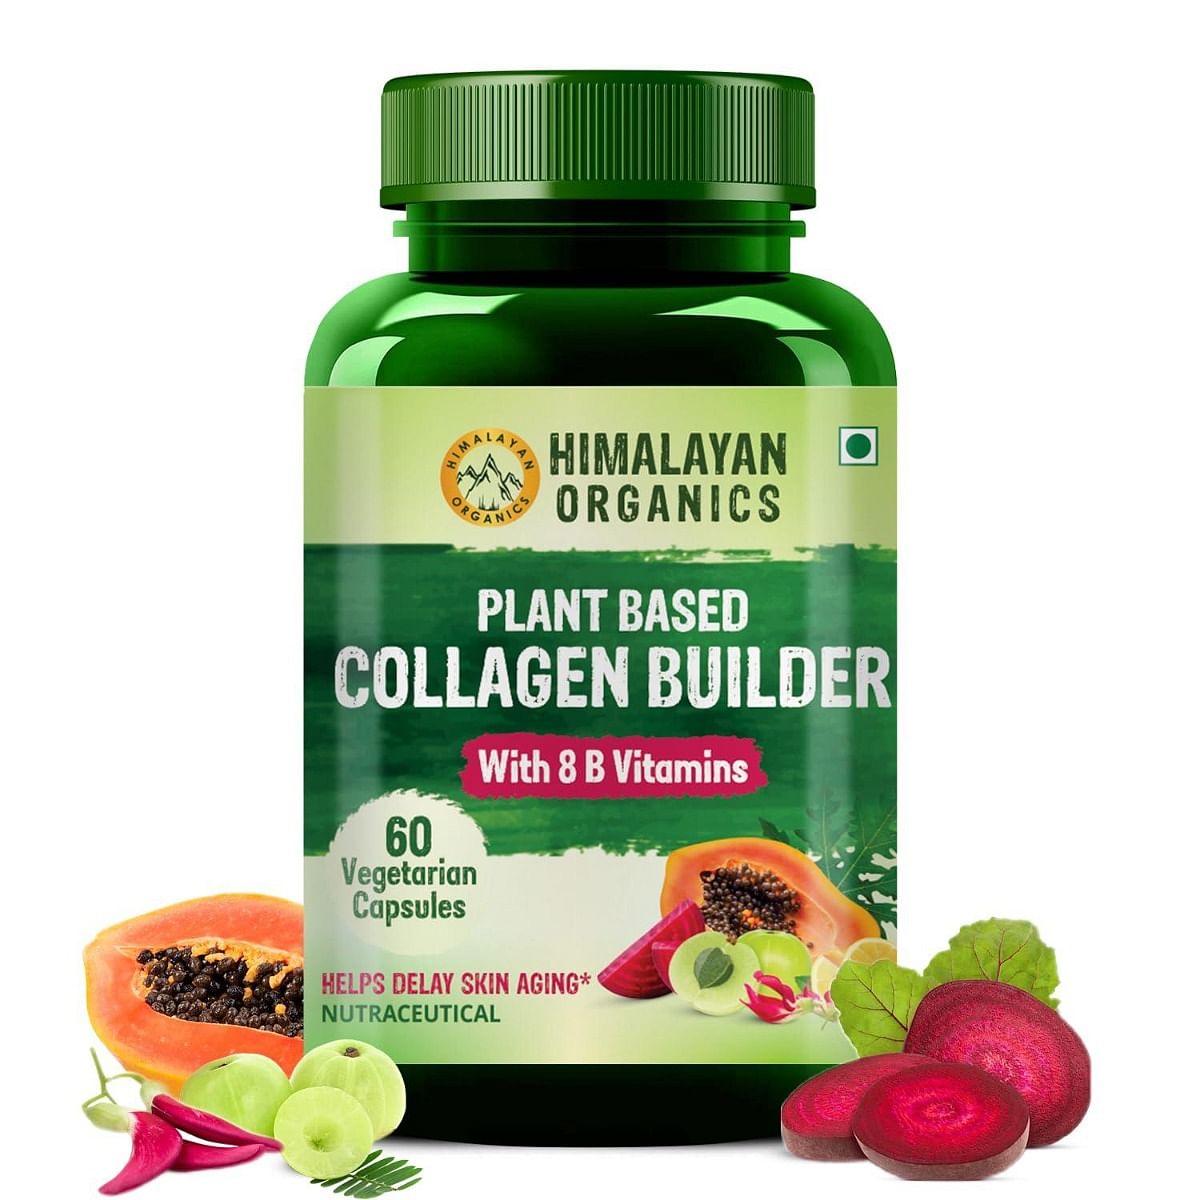 

Himalayan Organics Plant Based Collagen Builder for Hair and Skin with Biotin and Vitamin C - 60 Veg Capsules